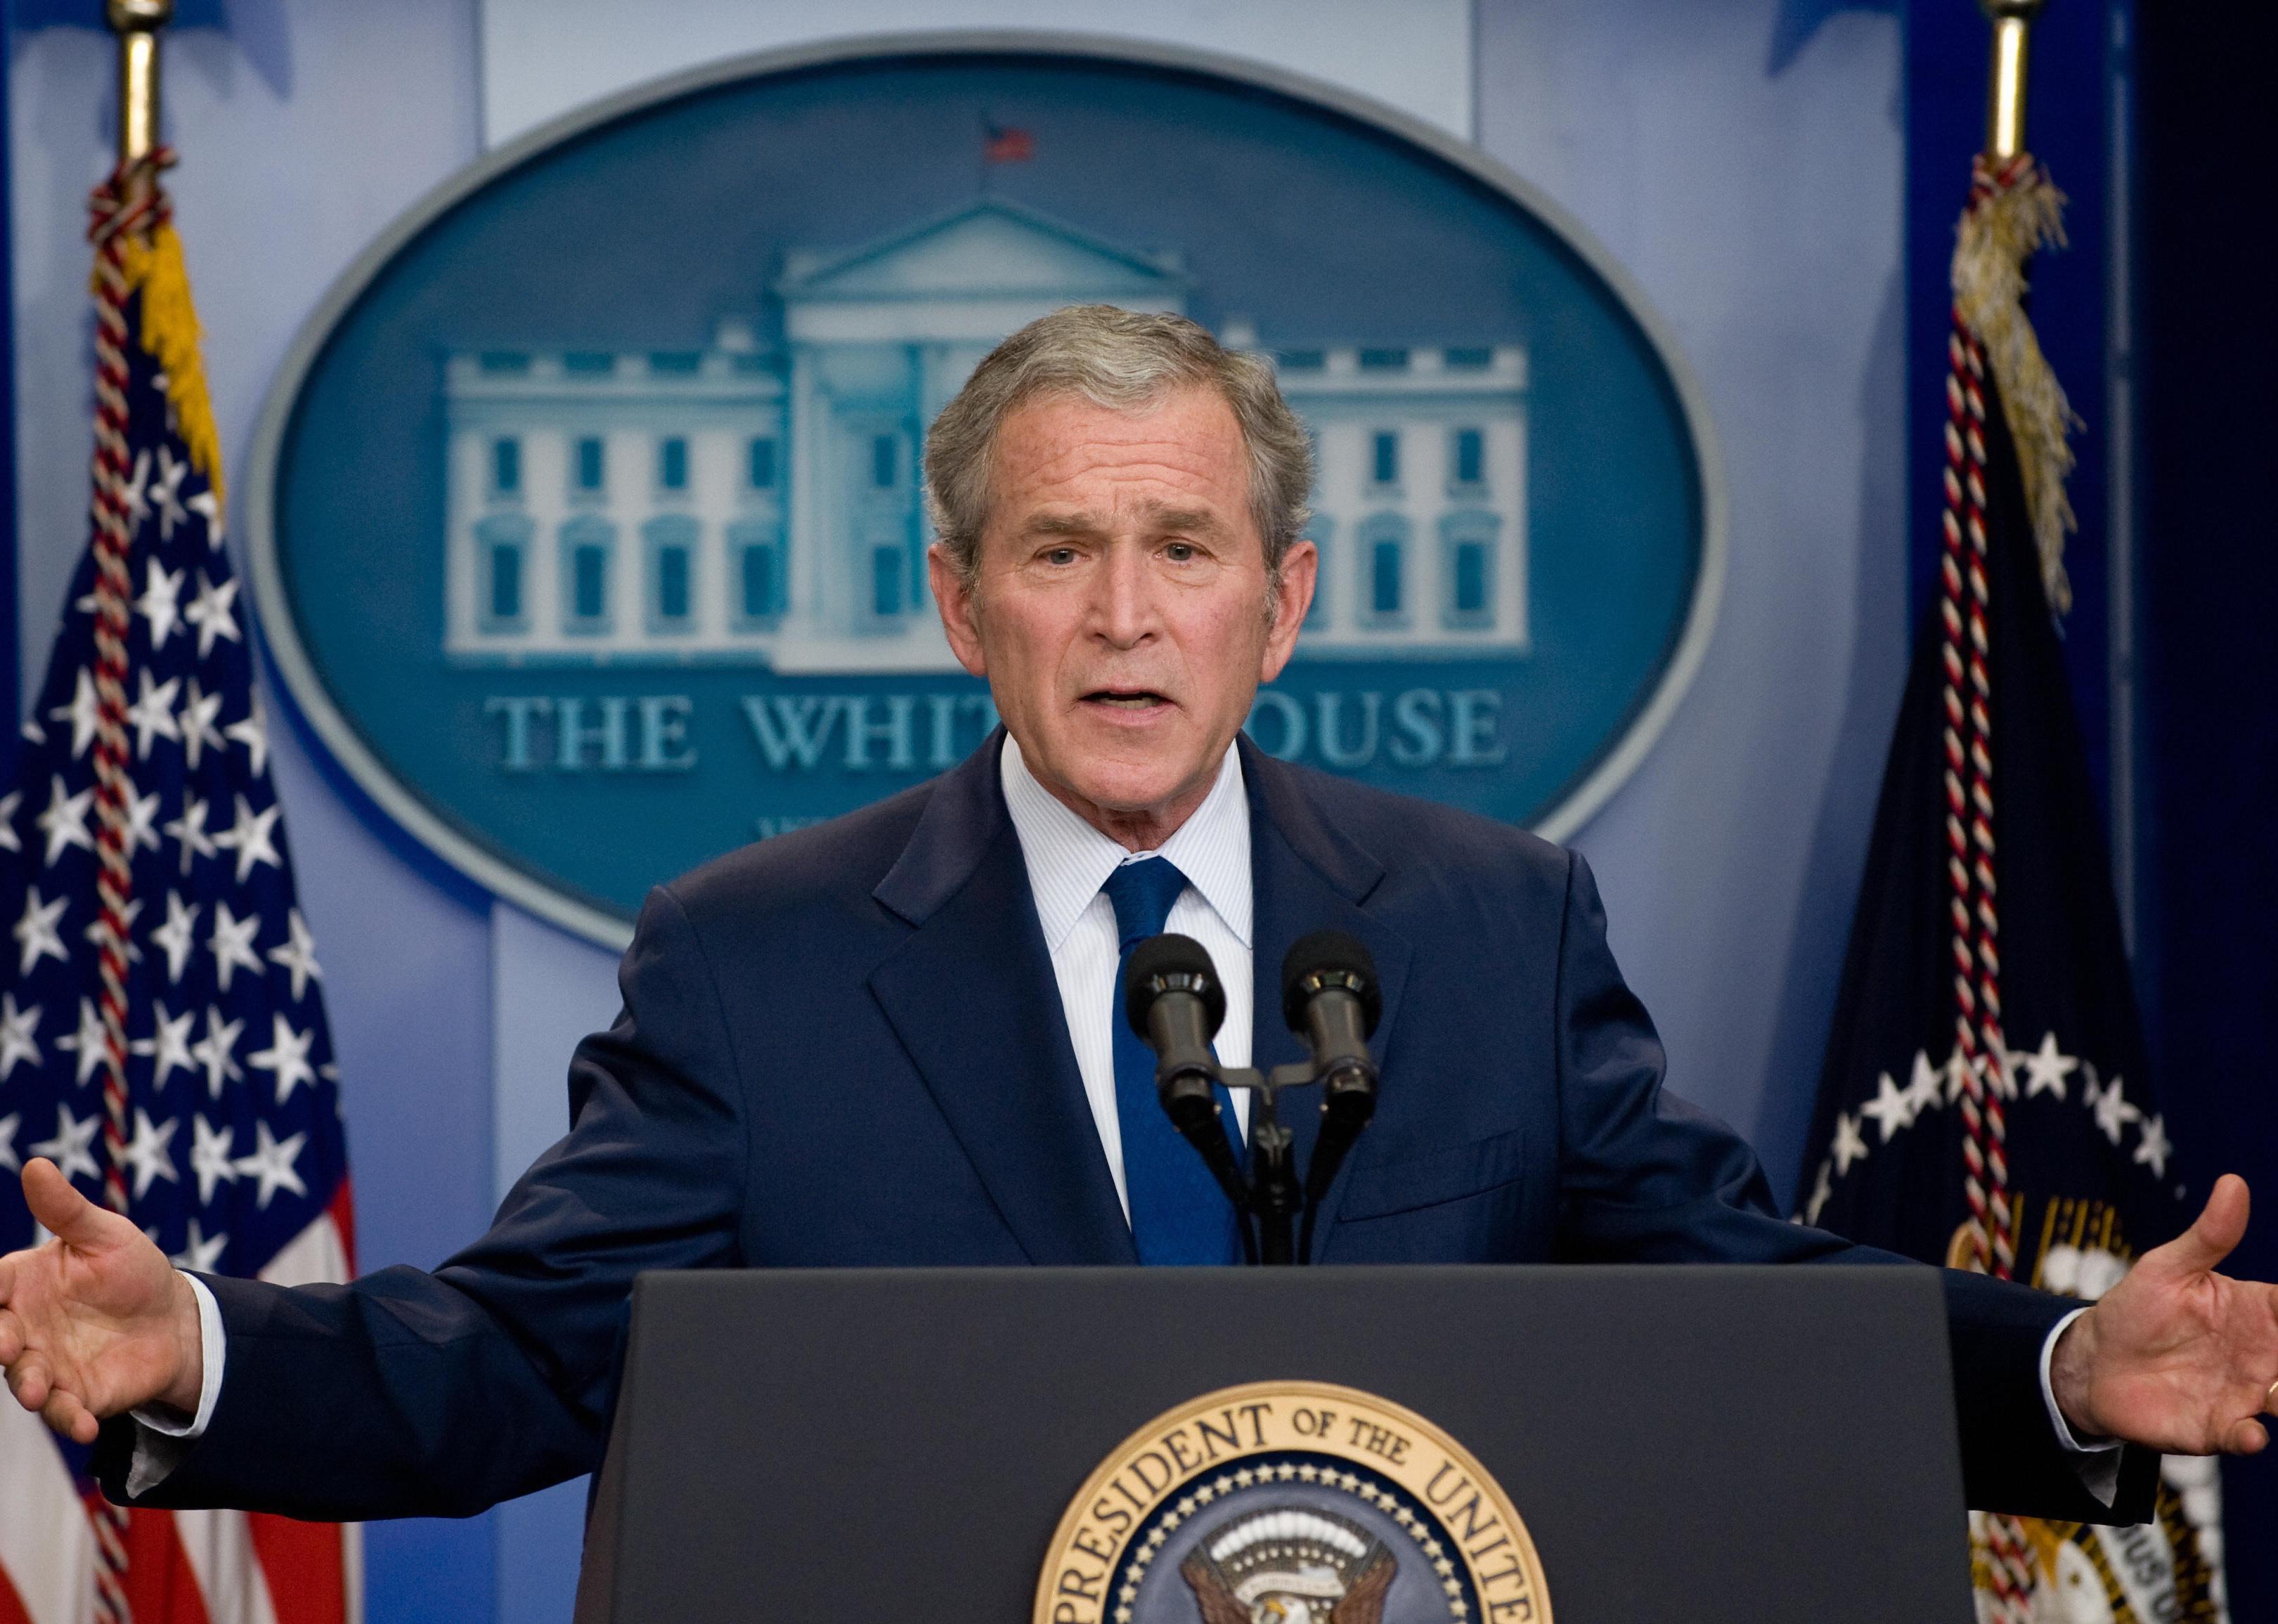 George W. Bush speaking at a podium at the White House.